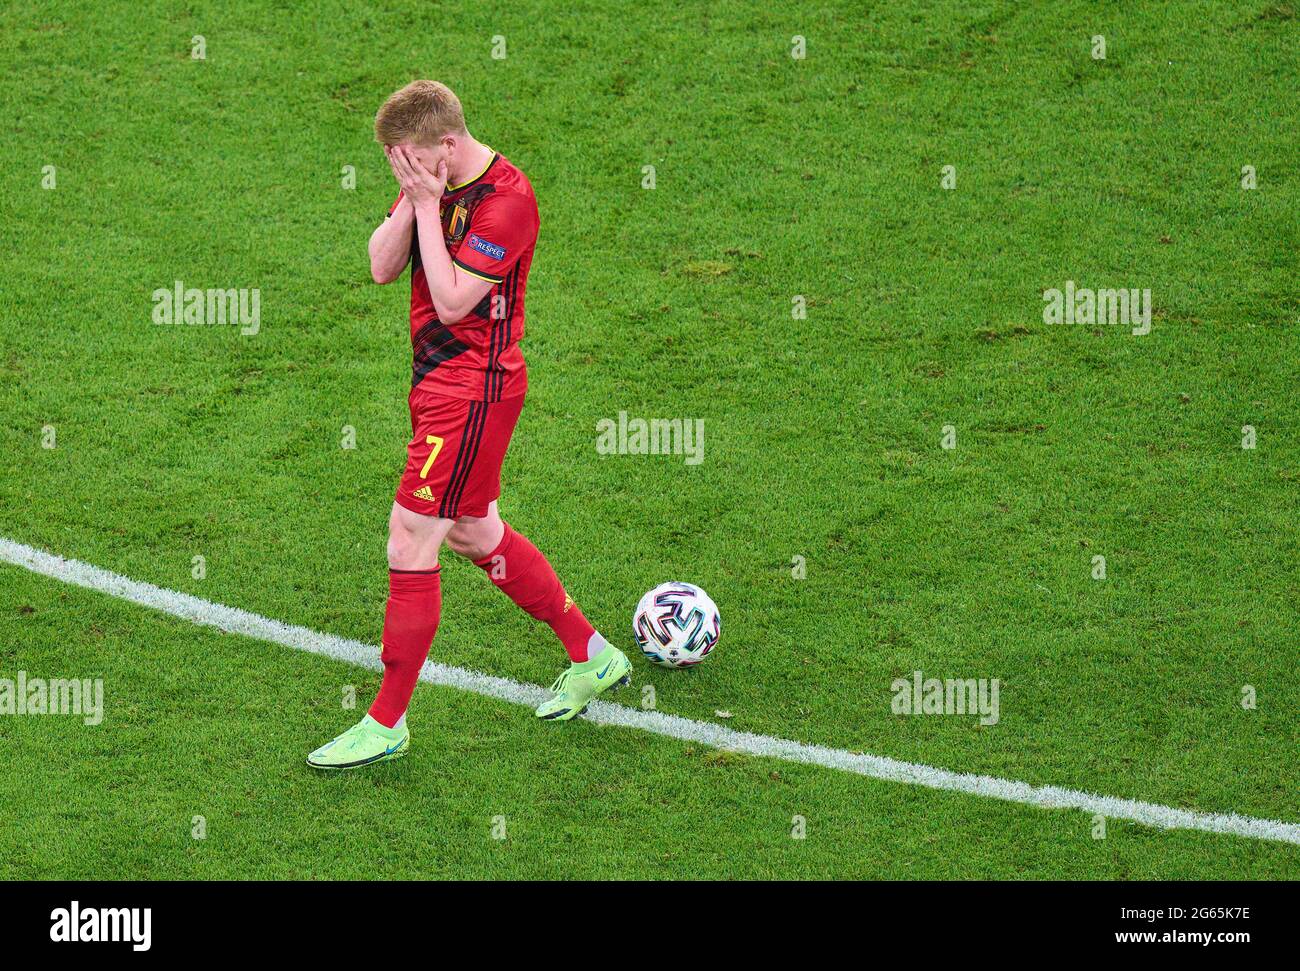 Kevin DE BRUYNE, Belgium Nr.7 sad in the quarterfinal match BELGIUM - ITALY  at the football UEFA European Championships 2020 in Season 2020/2021 on July 02, 2021  in Munich, Germany. © Peter Schatz / Alamy Live News Stock Photo